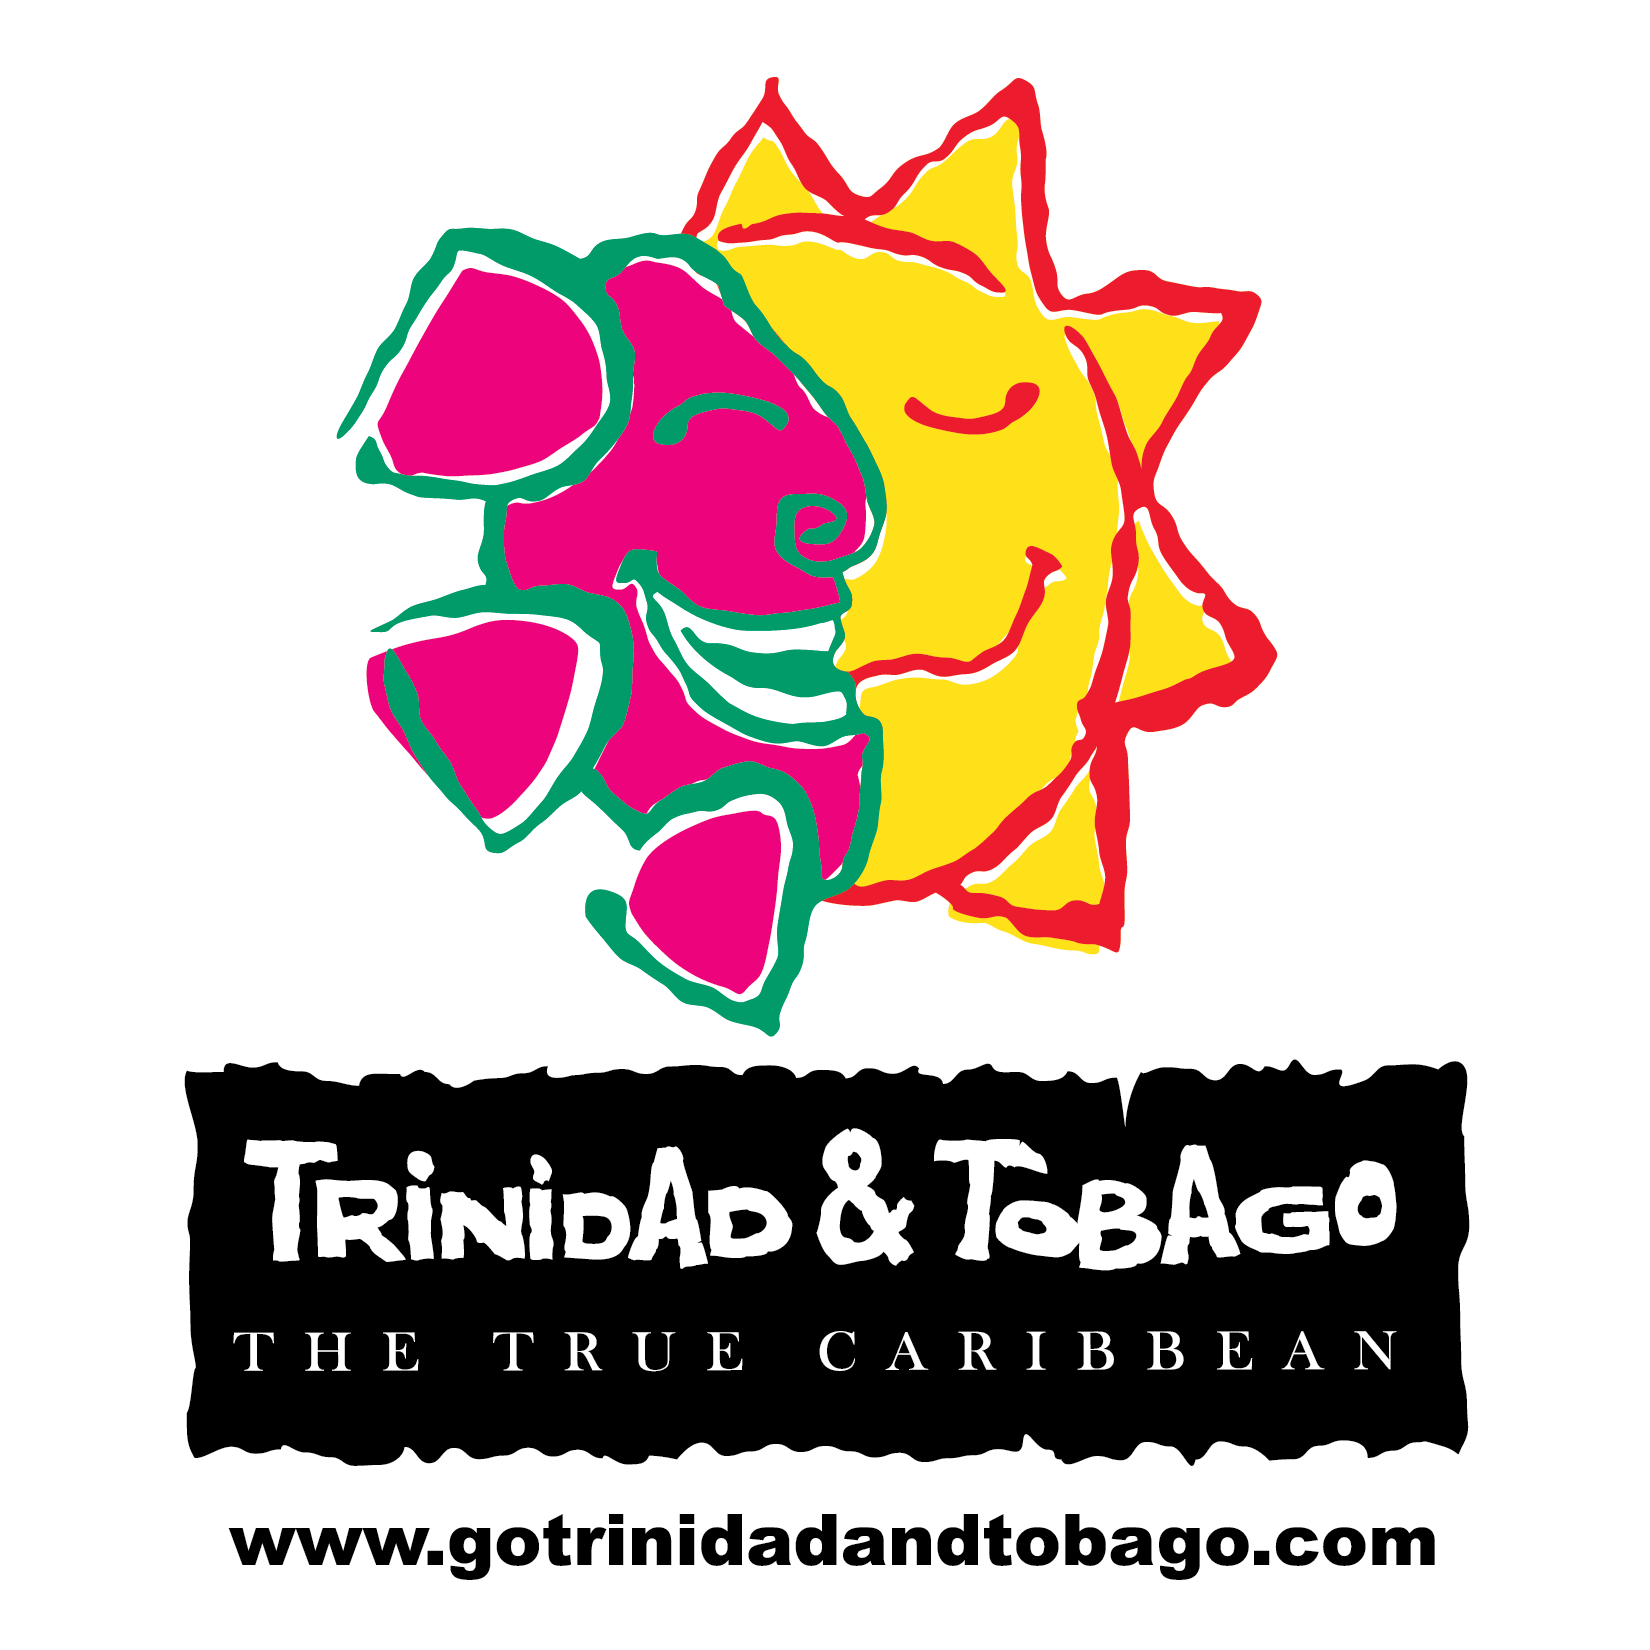 Discover Trinidad & Tobago, a unique Caribbean paradise - bursting with spirit and a heady mix of cultural activities, eco adventure and culinary delights.